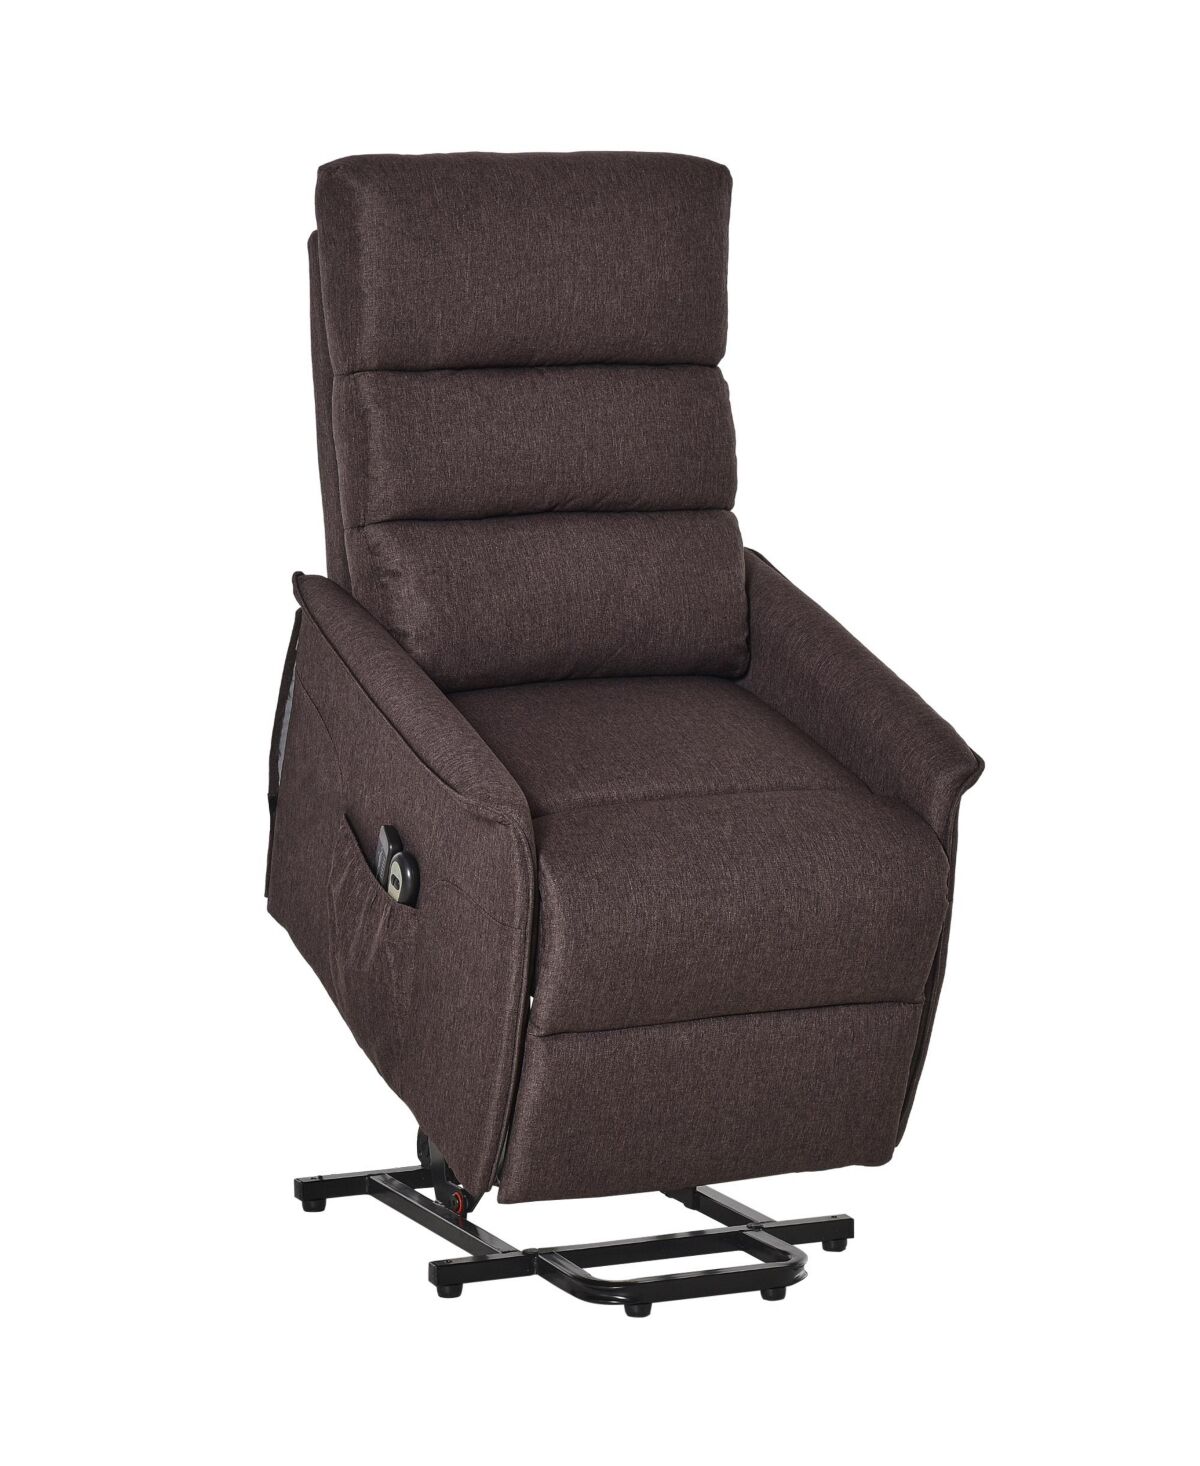 Homcom Electric Lift Recliner Massage Chair Vibration, Living Room Office Furniture, Brown - Brown